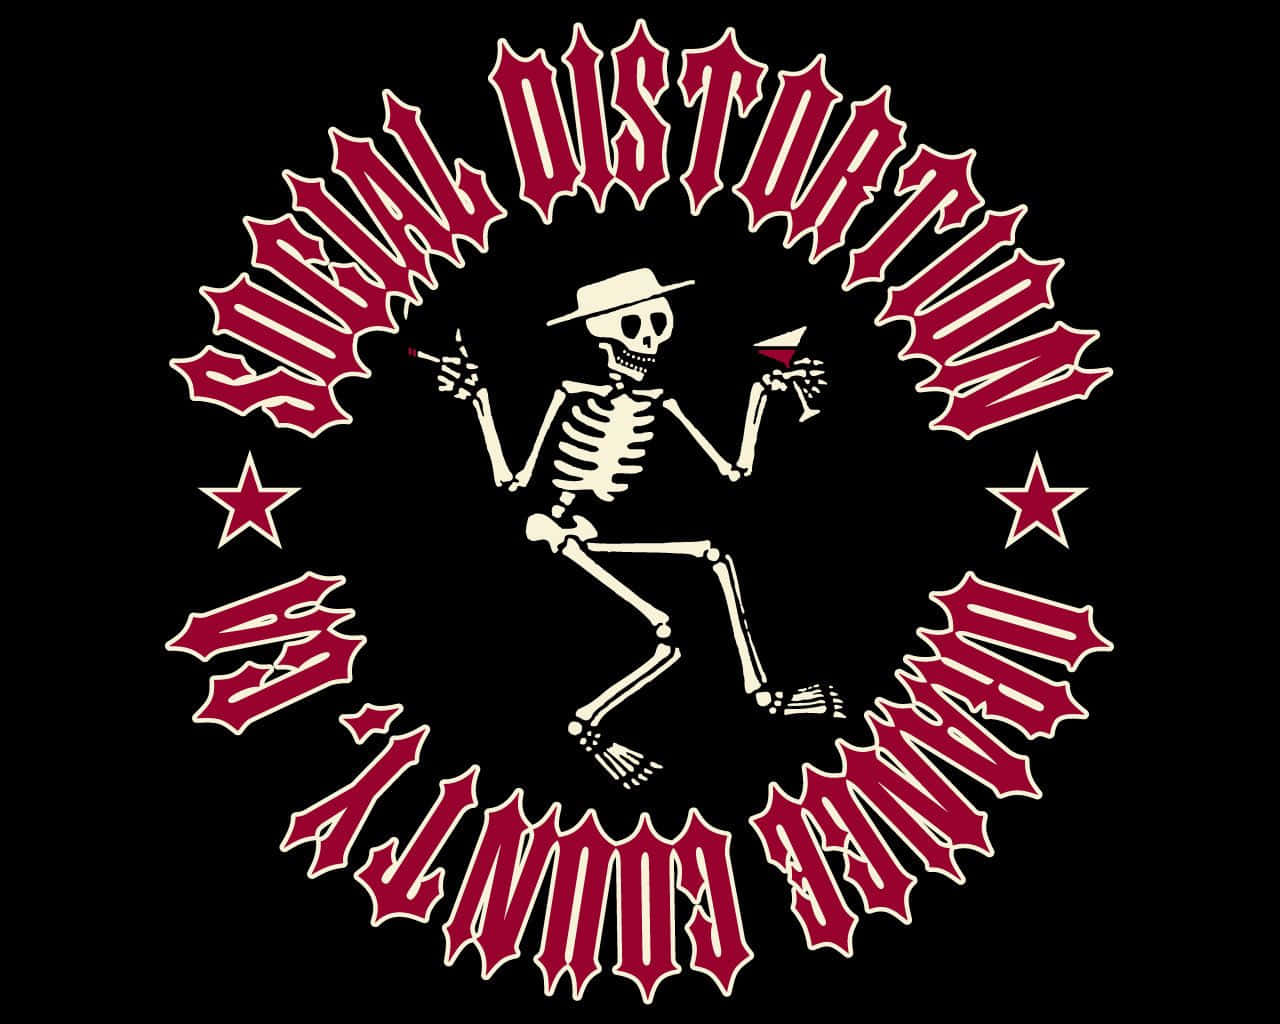 Captivating Live Performance By Social Distortion Wallpaper